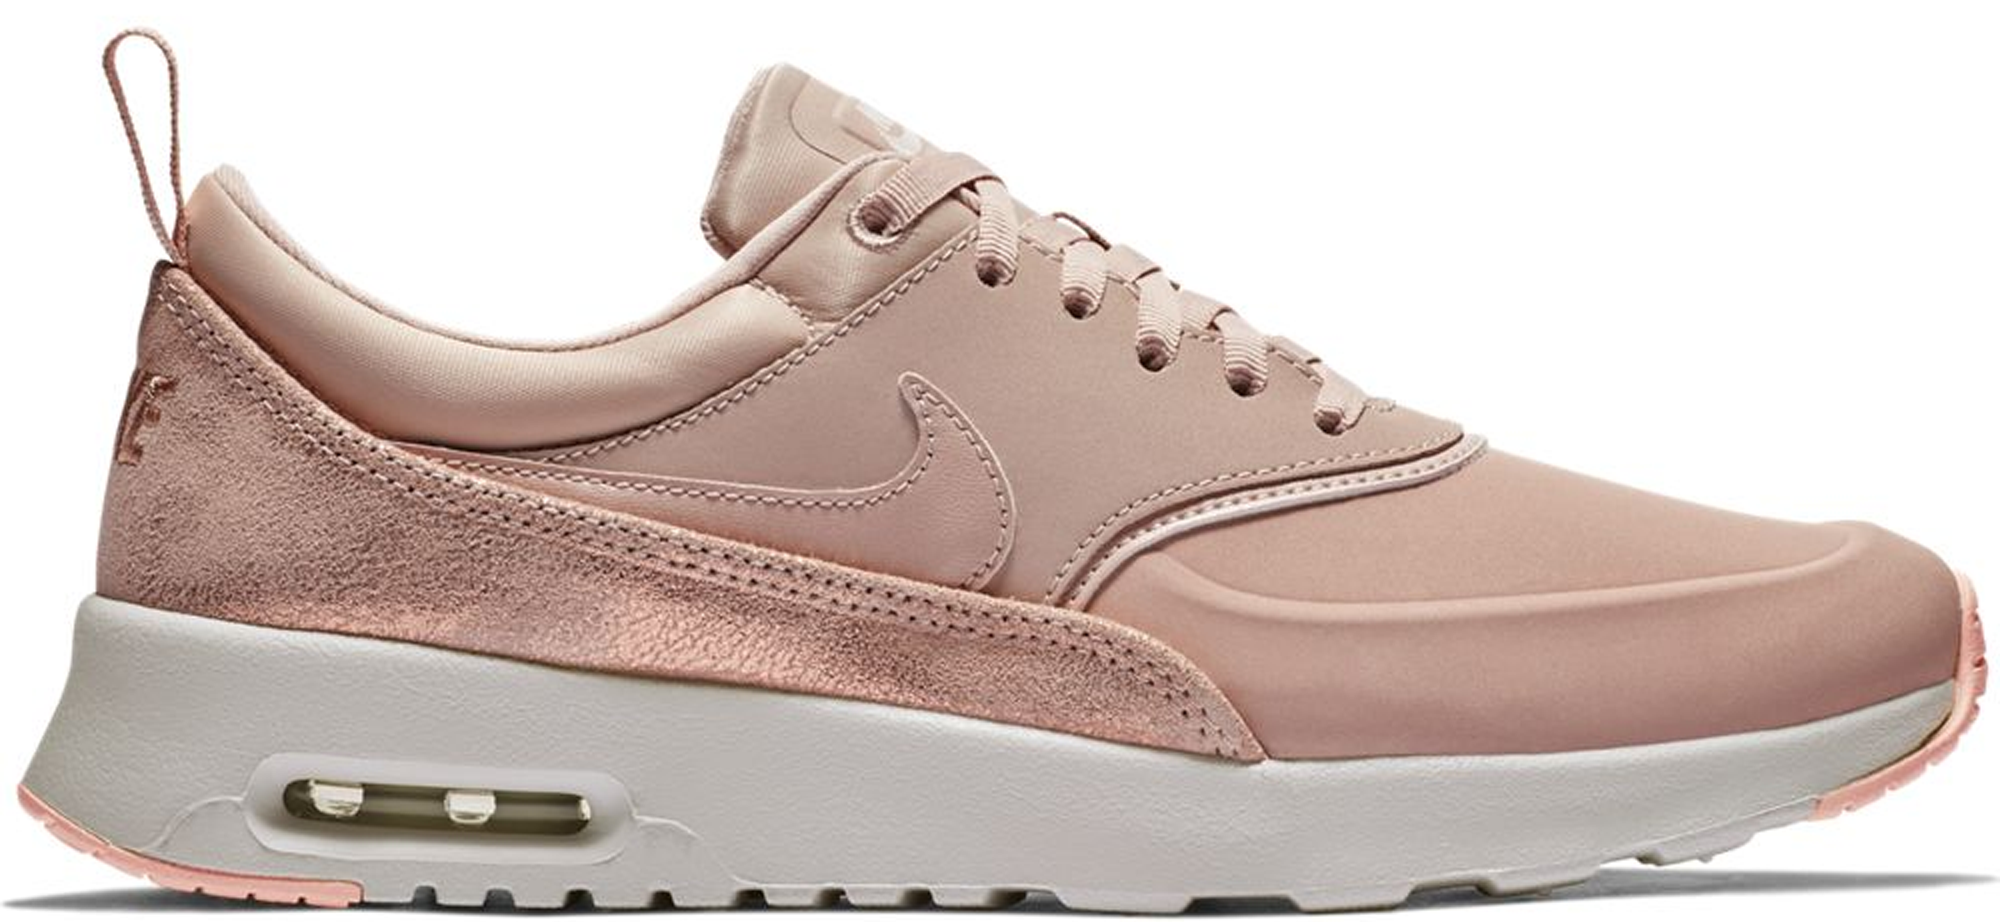 Nike Air Max Thea Particle Beige (W 